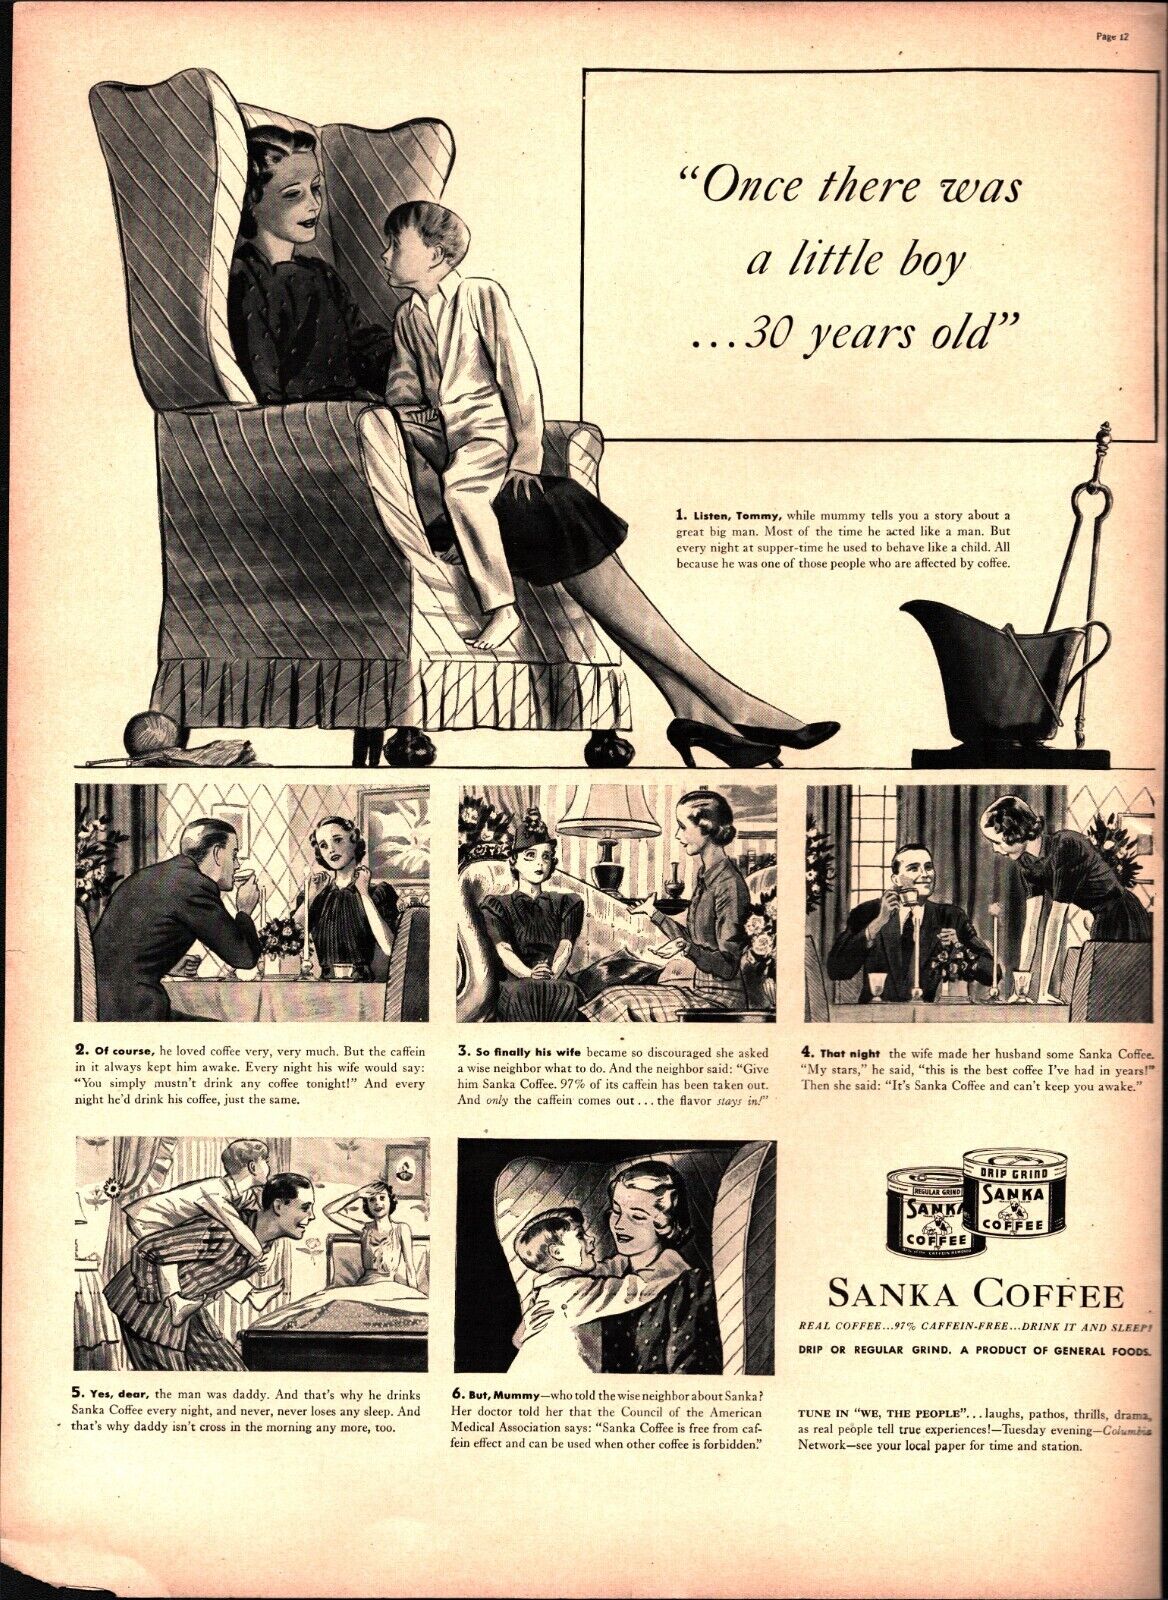 1939 Sanka Coffee Once there was a little boy 30 years old d7